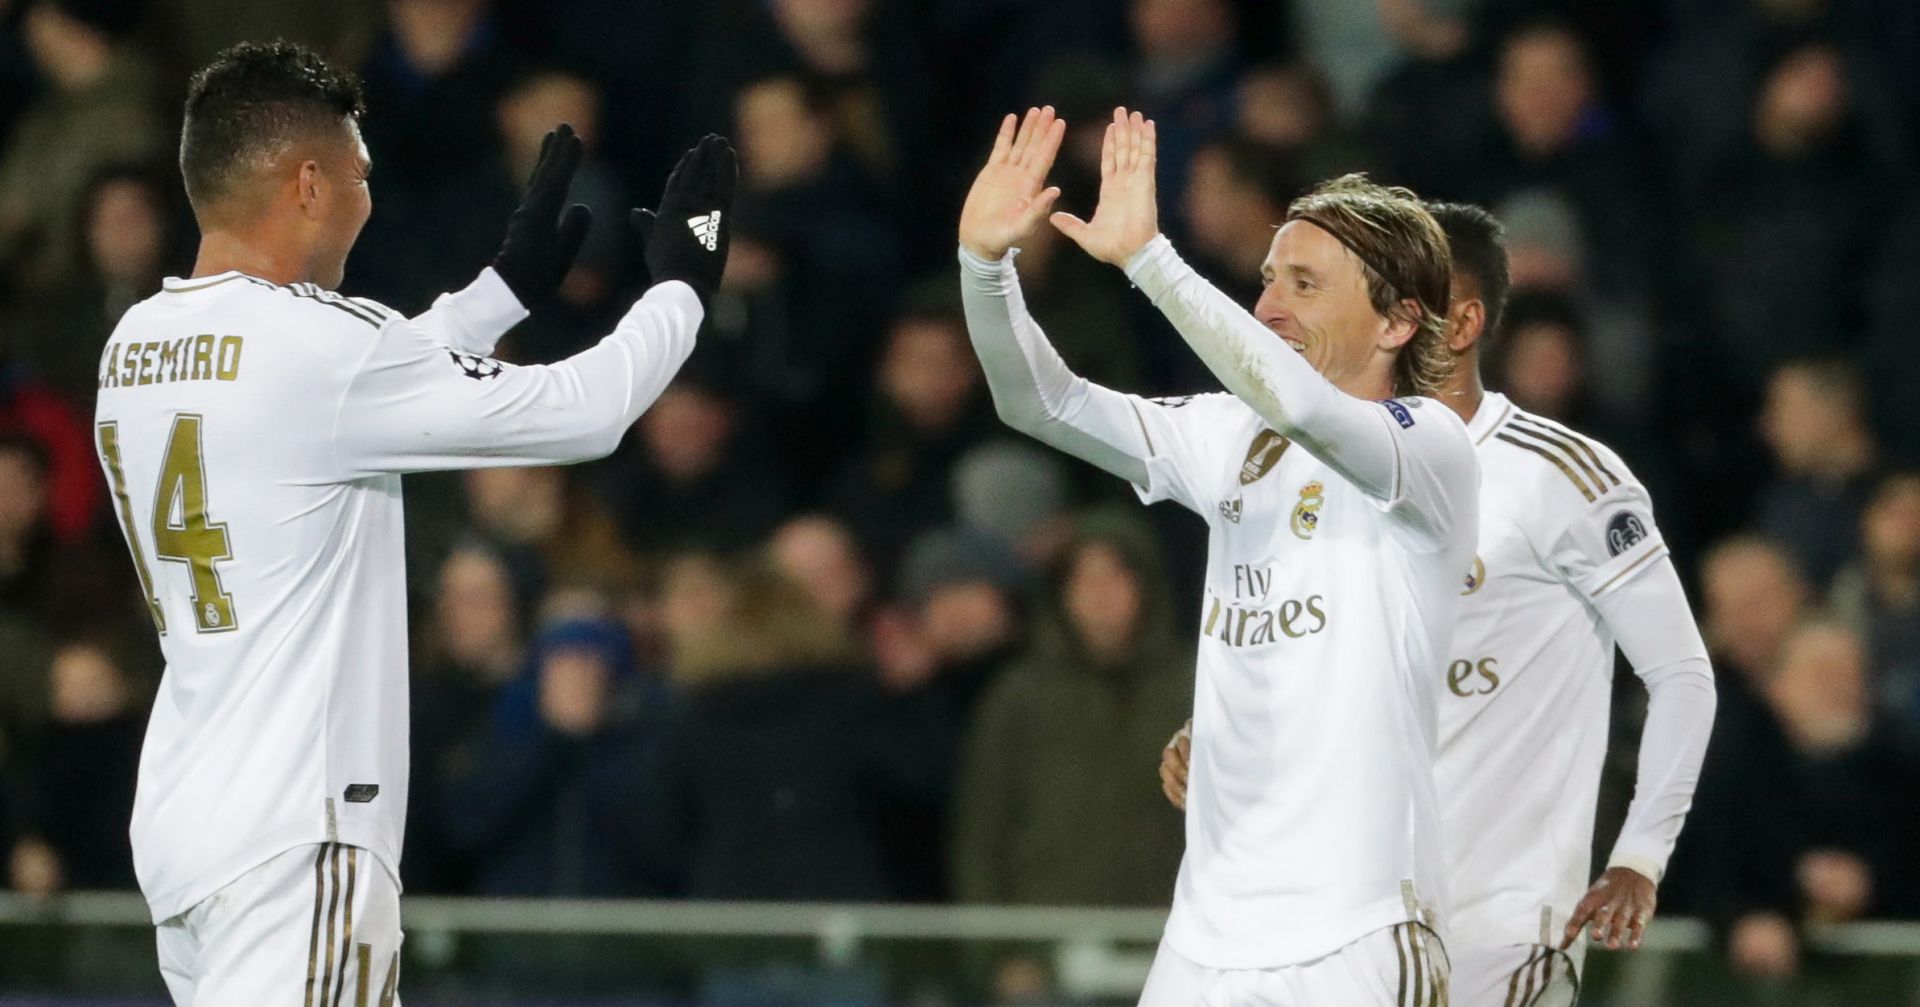 epa08063884 Real Madrid's Luka Modric celebrates with team mate Casemiro (L) after scoring a goal during the UEFA Champions League group A match between Club Brugge and Real Madrid in Bruges, Belgium, 11 December 2019.  EPA/STEPHANIE LECOCQ